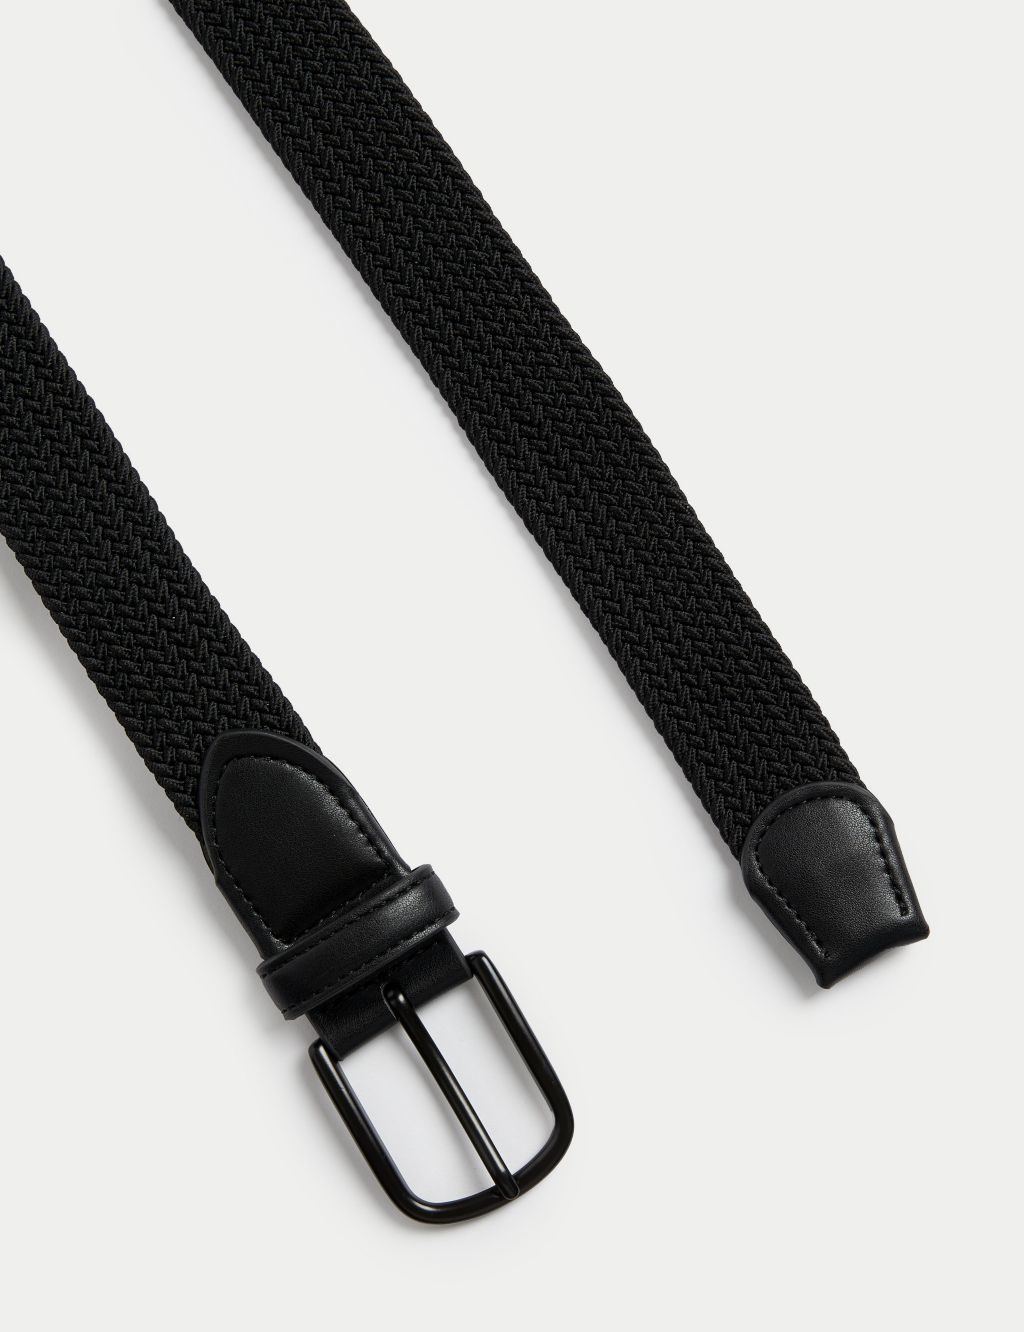 Stretch Woven Casual Belt image 2